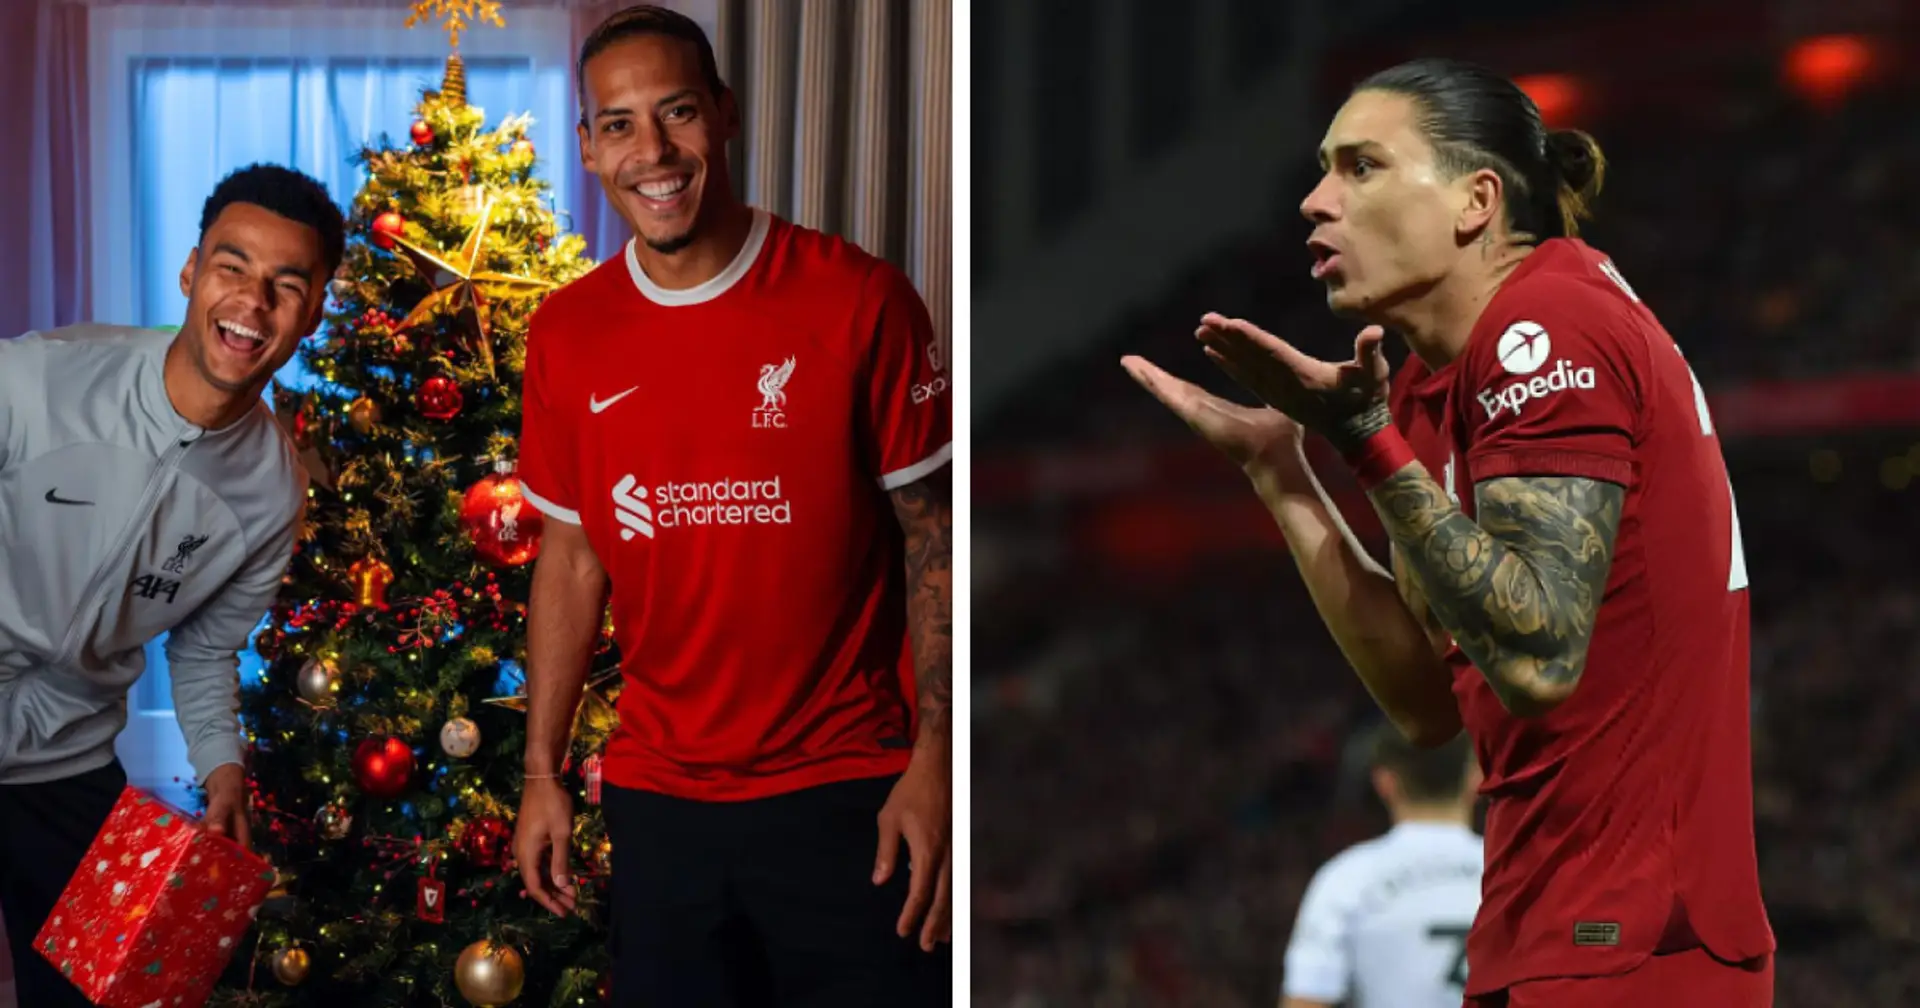 'Who’s our next Dutch boy': Liverpool fans found double meaning in recent Gakpo & Van Dijk photo